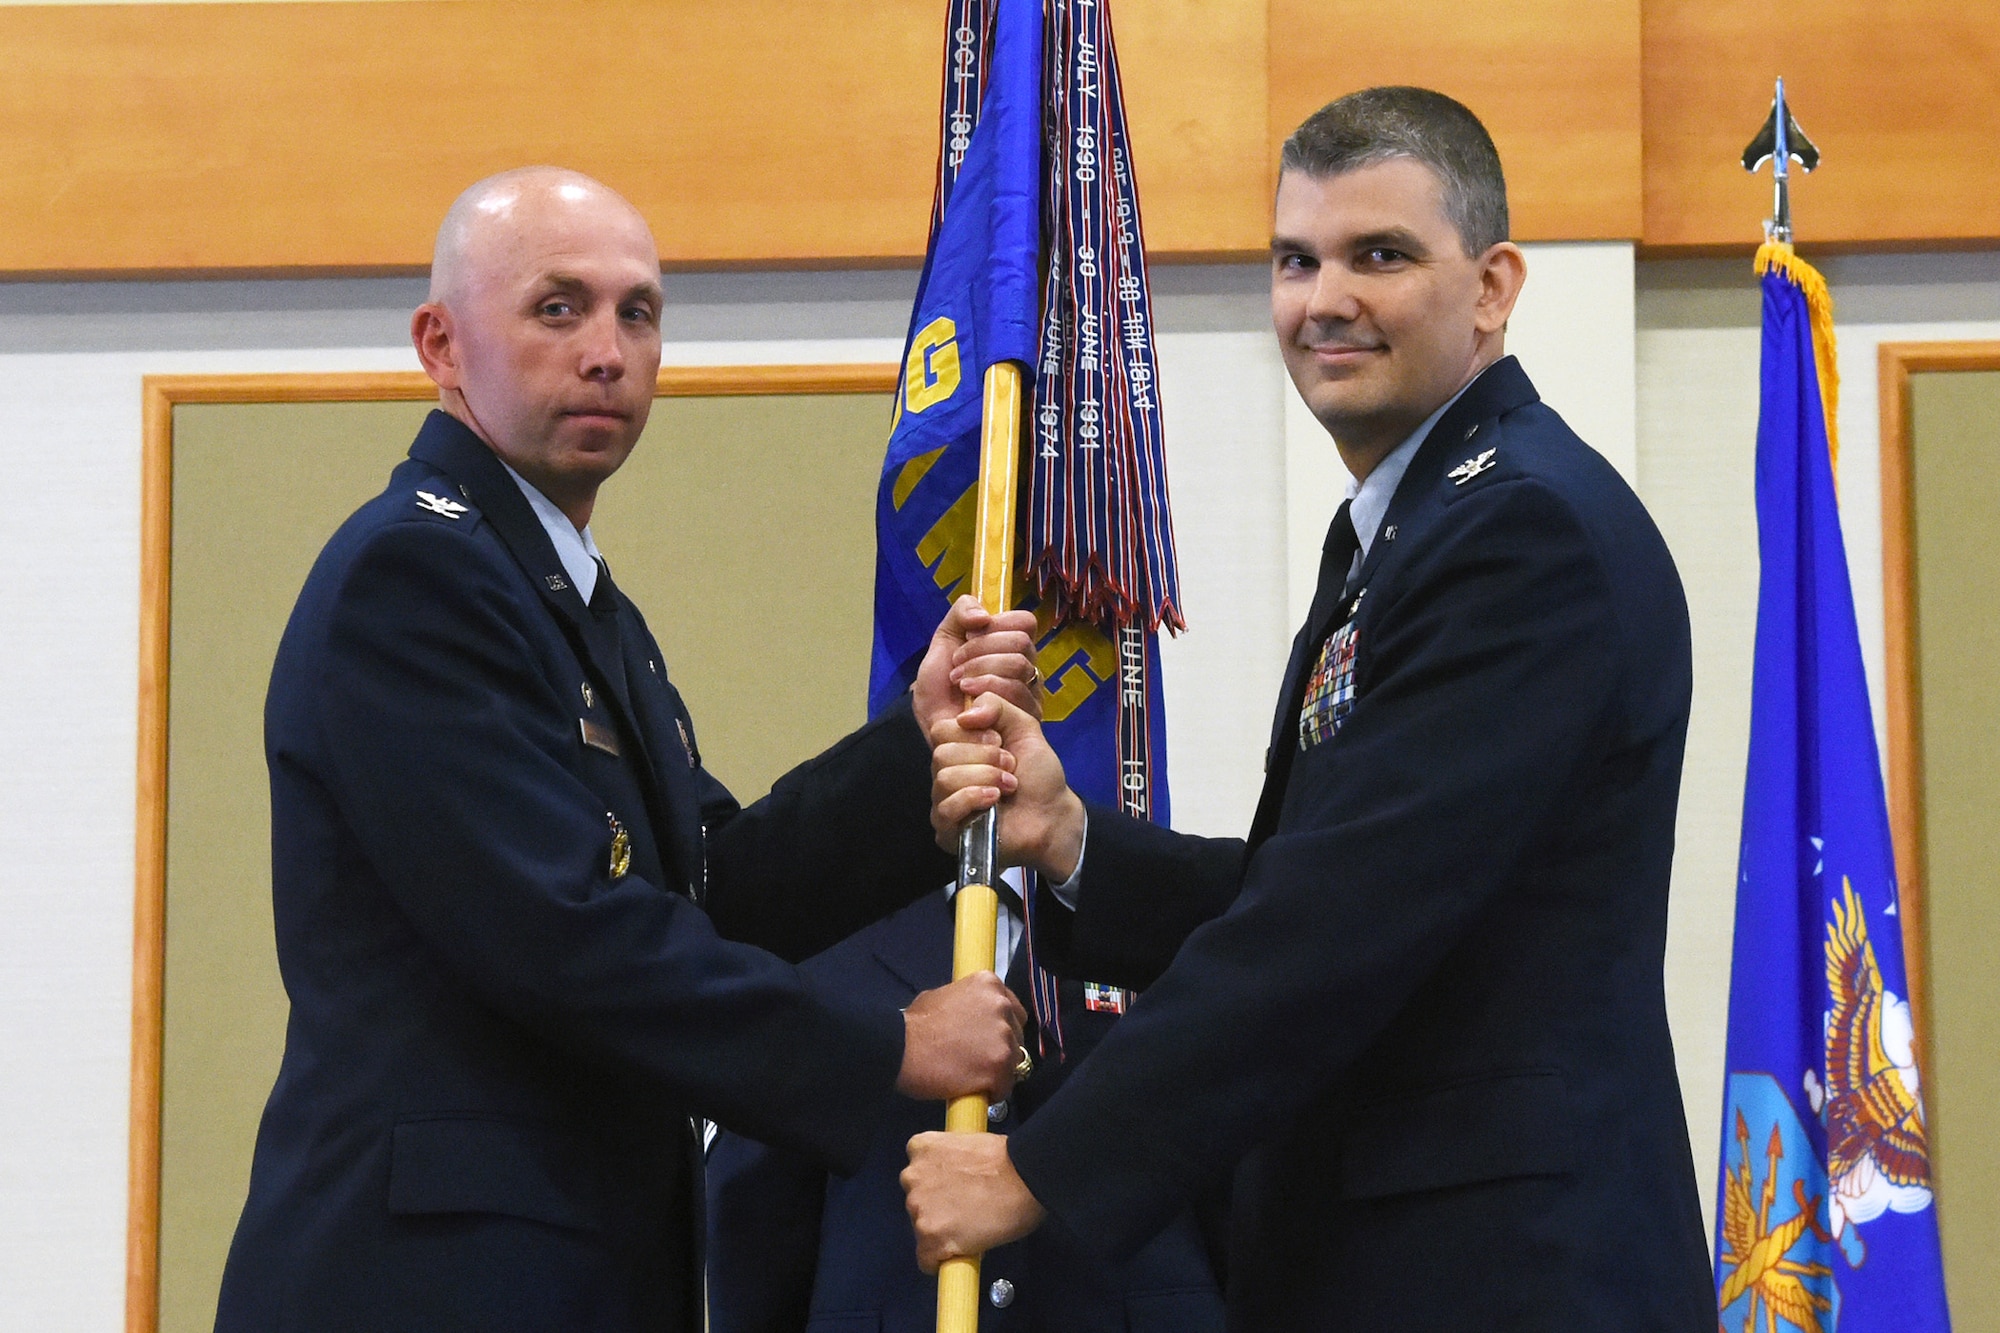 Col. Craig Forcum, right, accepts command of the 341st Medical Group from Col. Ron Allen, 341st Missile Wing commander, during a change of command ceremony at the Grizzly Bend July 7, 2016, at Malmstrom Air Force Base, Mont. Forcum arrived at Malmstrom on June 30, and took command of the 341 MDG on July 7, 2016. (U.S. Air Force photo/Senior Airman Jaeda Tookes)